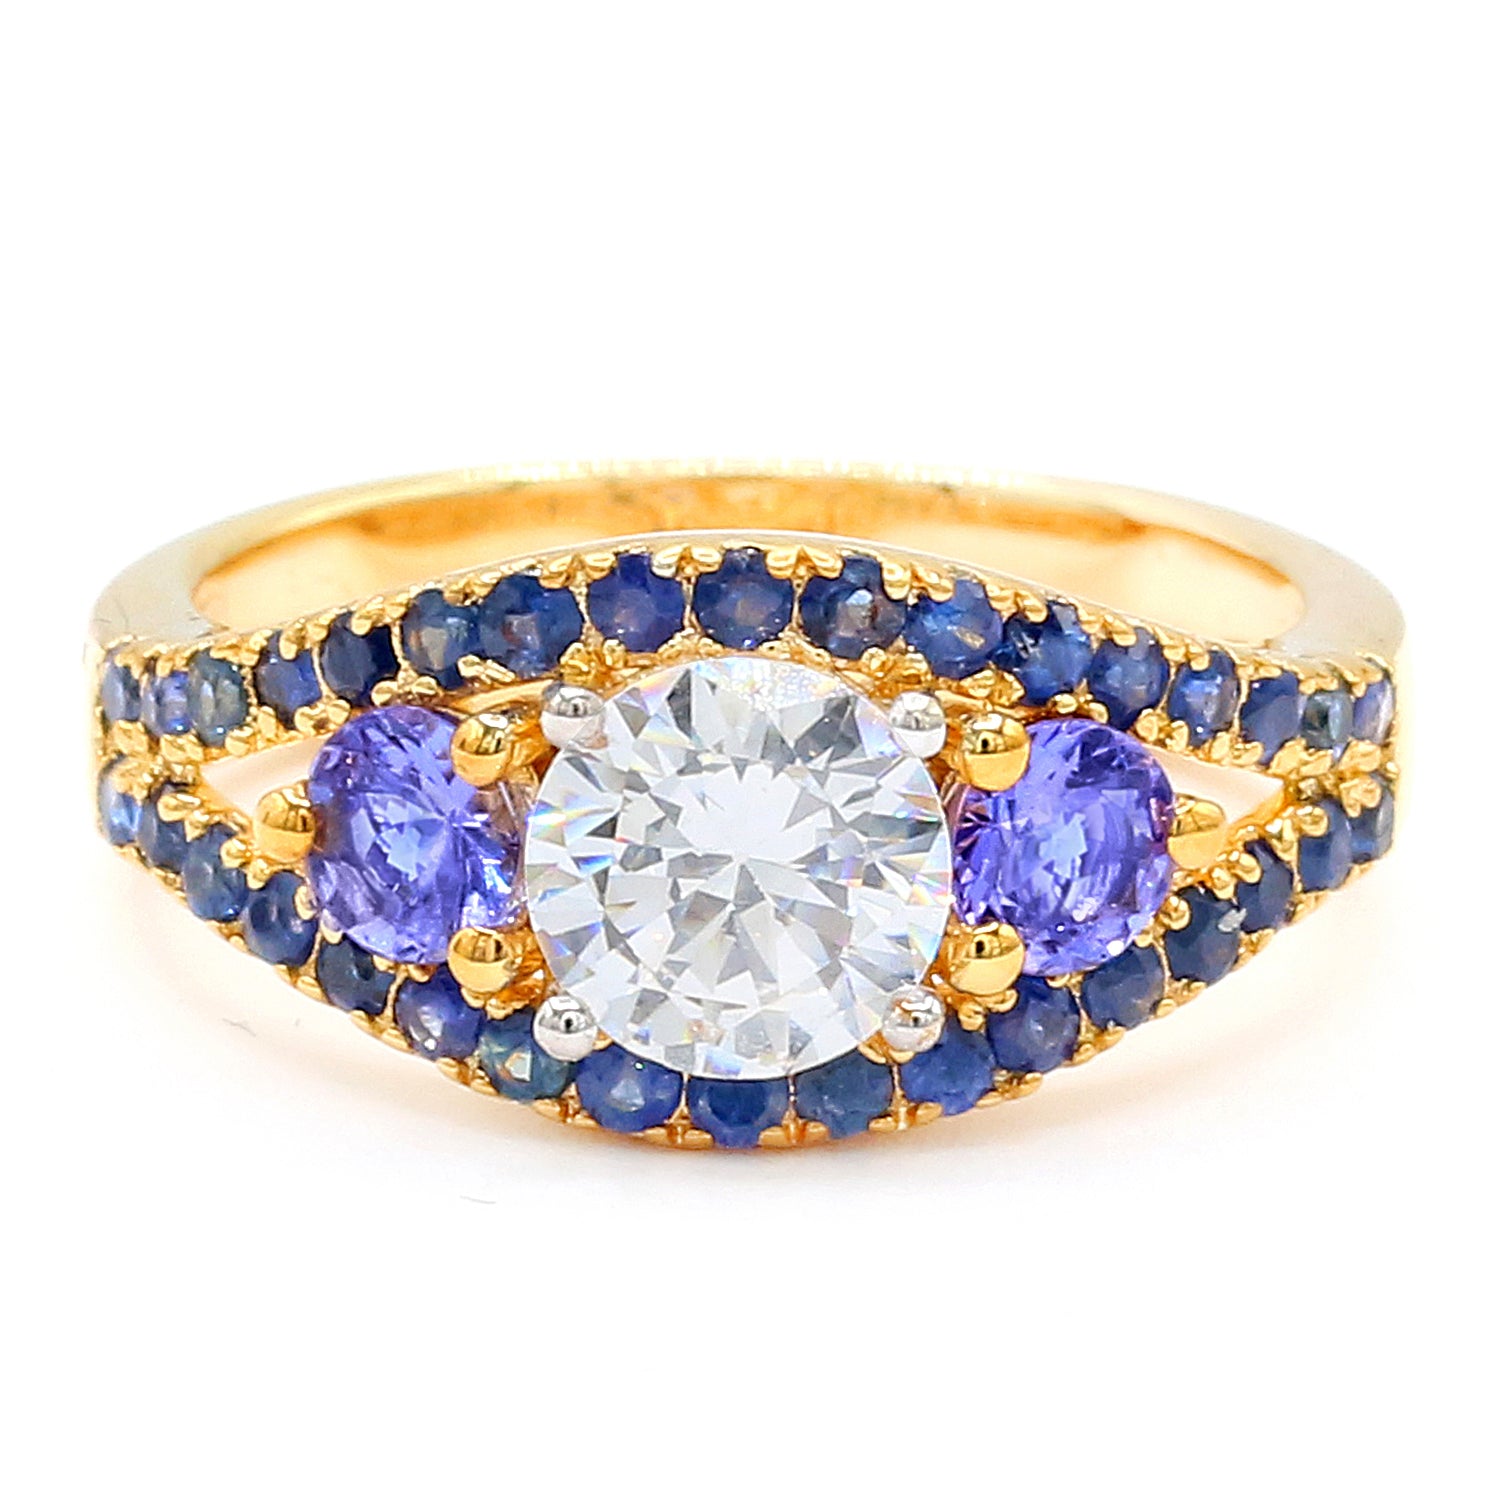 Limited Edition Gems en Vogue Luxe, One-of-a-kind IGI Certified Over 1ct Lab Grown Diamond & Blue Sapphire Ring